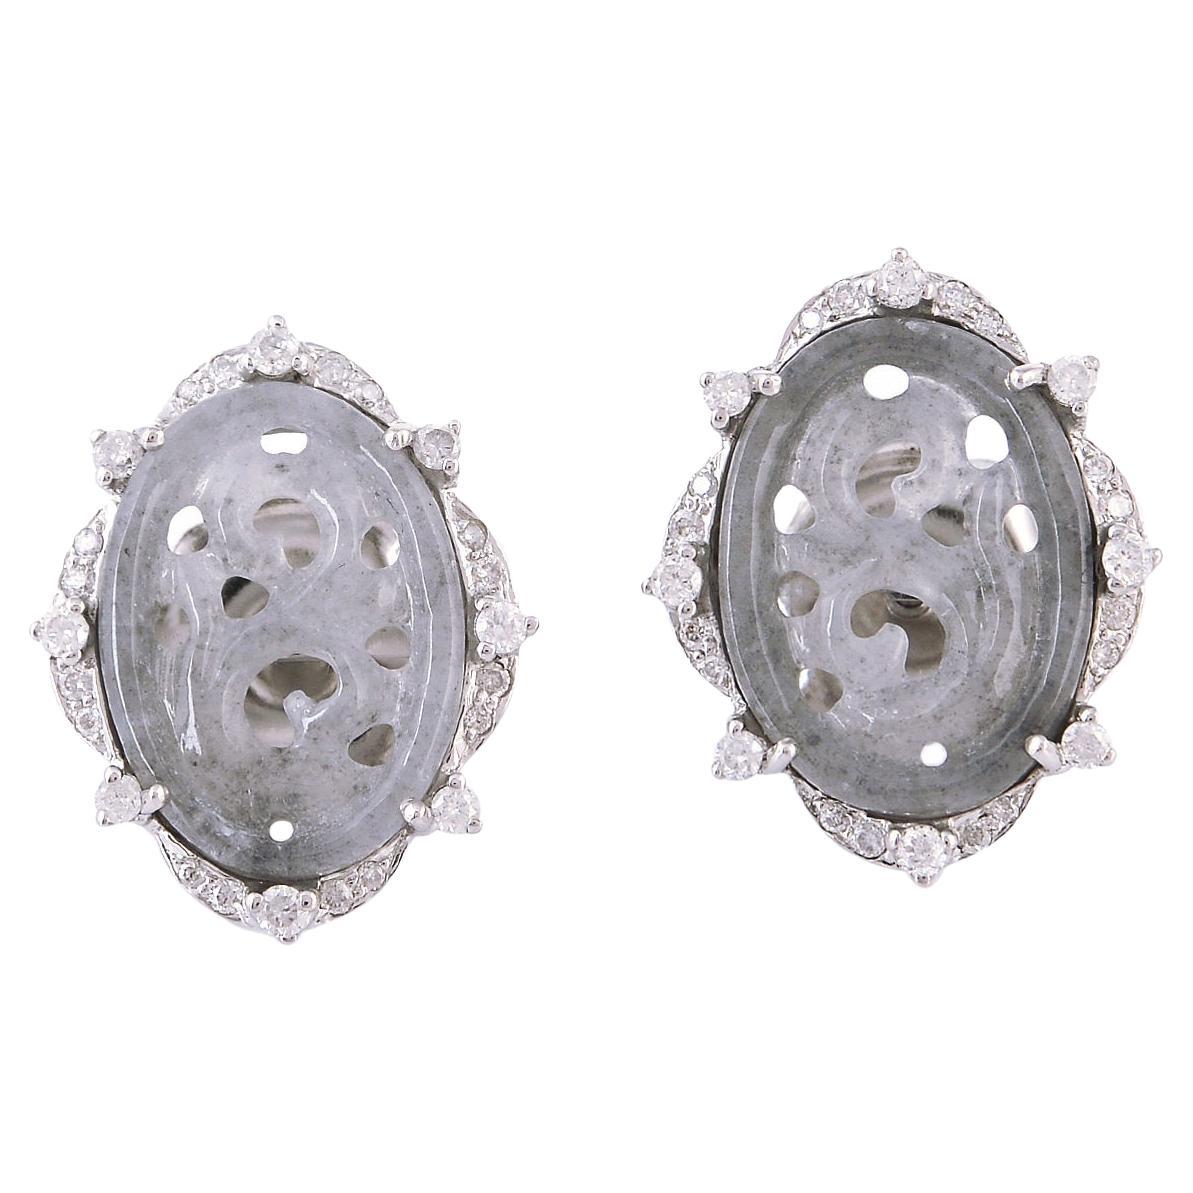 Oval Shaped Carved Jade Stud Earrings with Diamonds Made in 18k White Gold